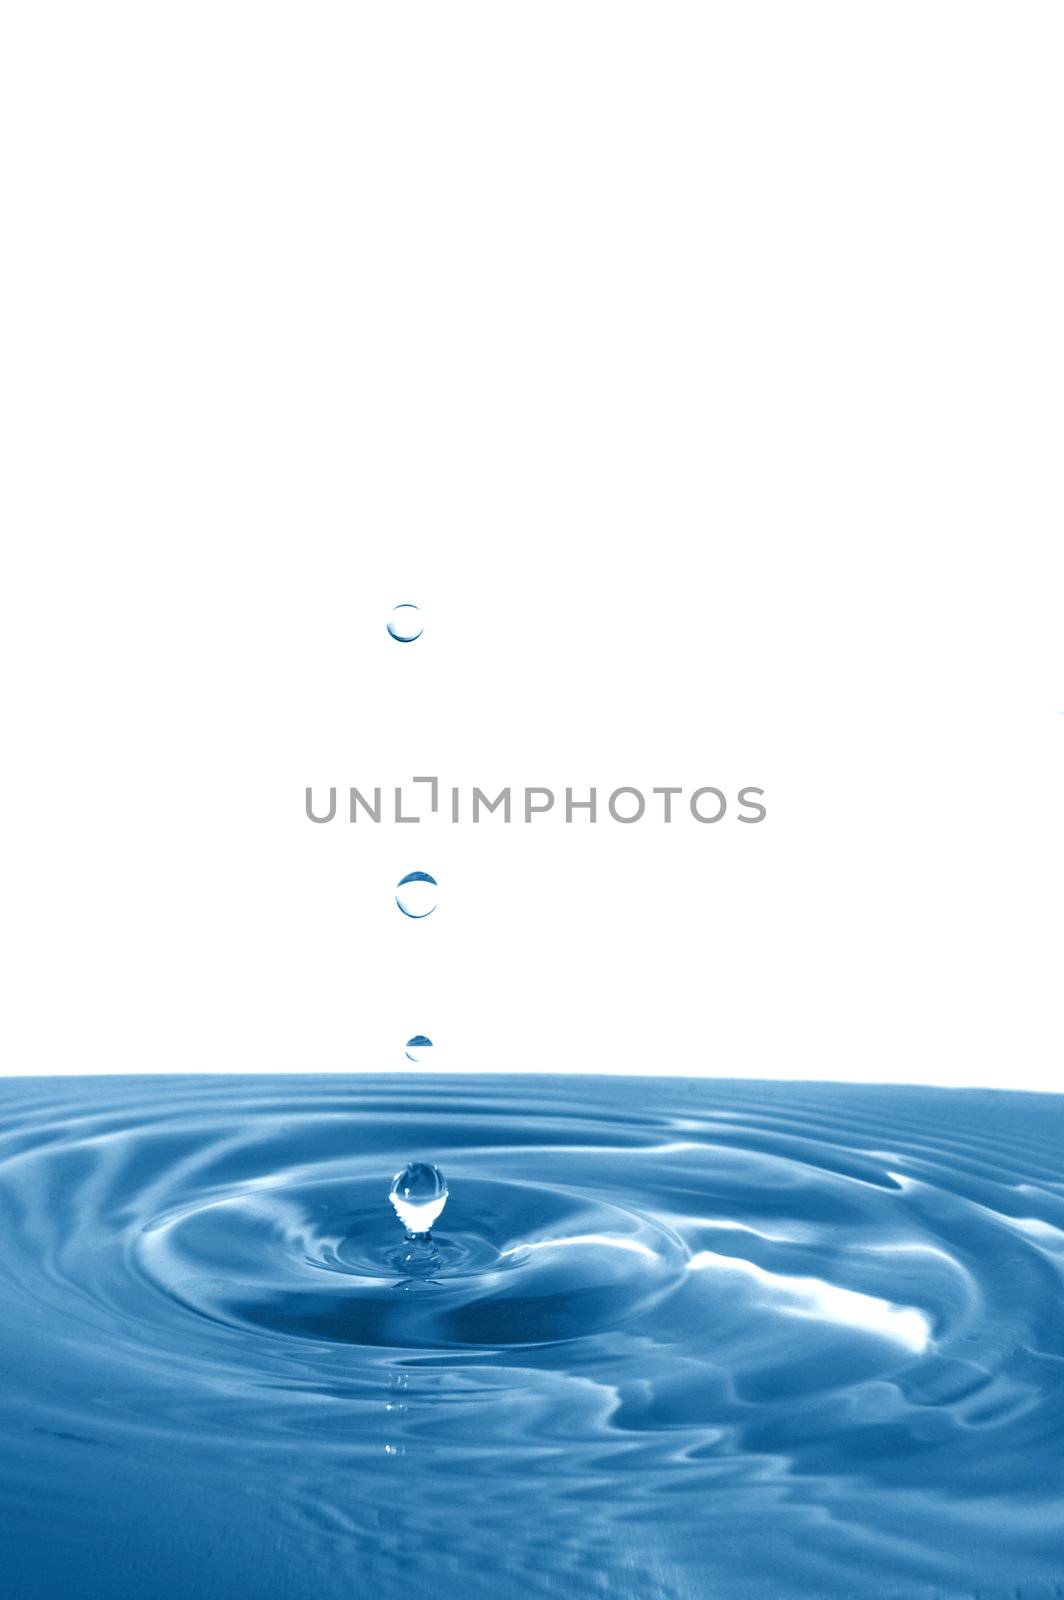 splash of water drop showing a concept of wellness